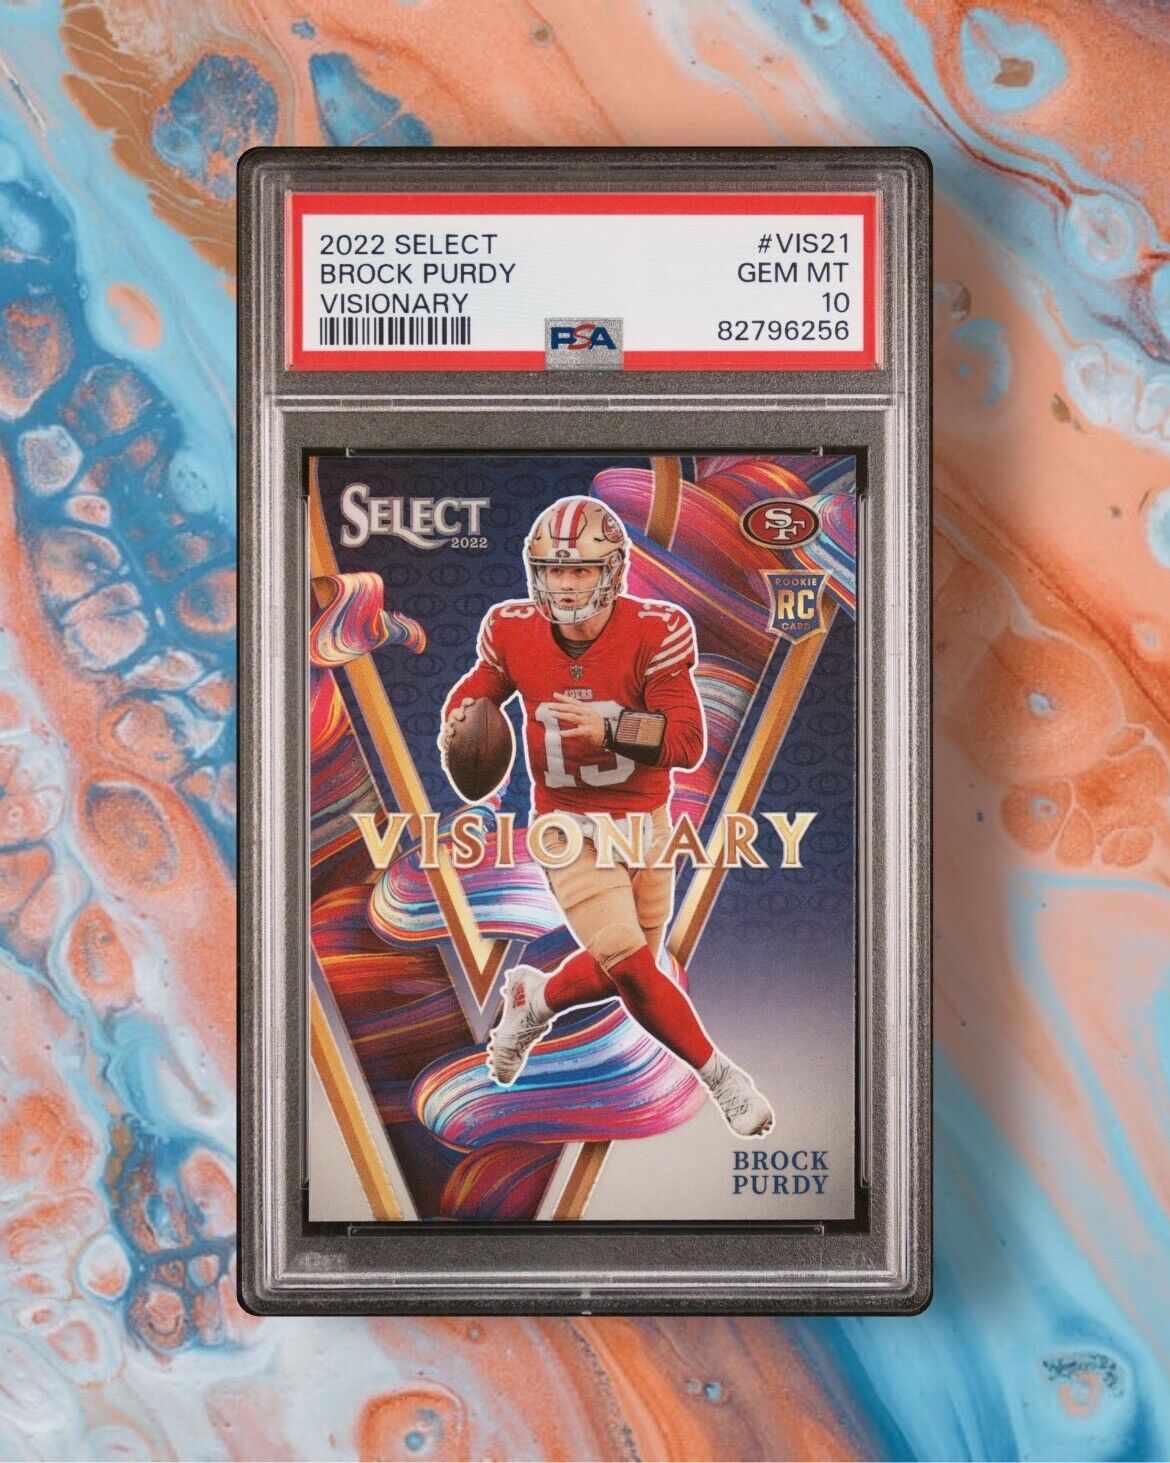 2022 Select Brock Purdy Visionary Rookie Silver Prizm Case Hit SSP PSA 10